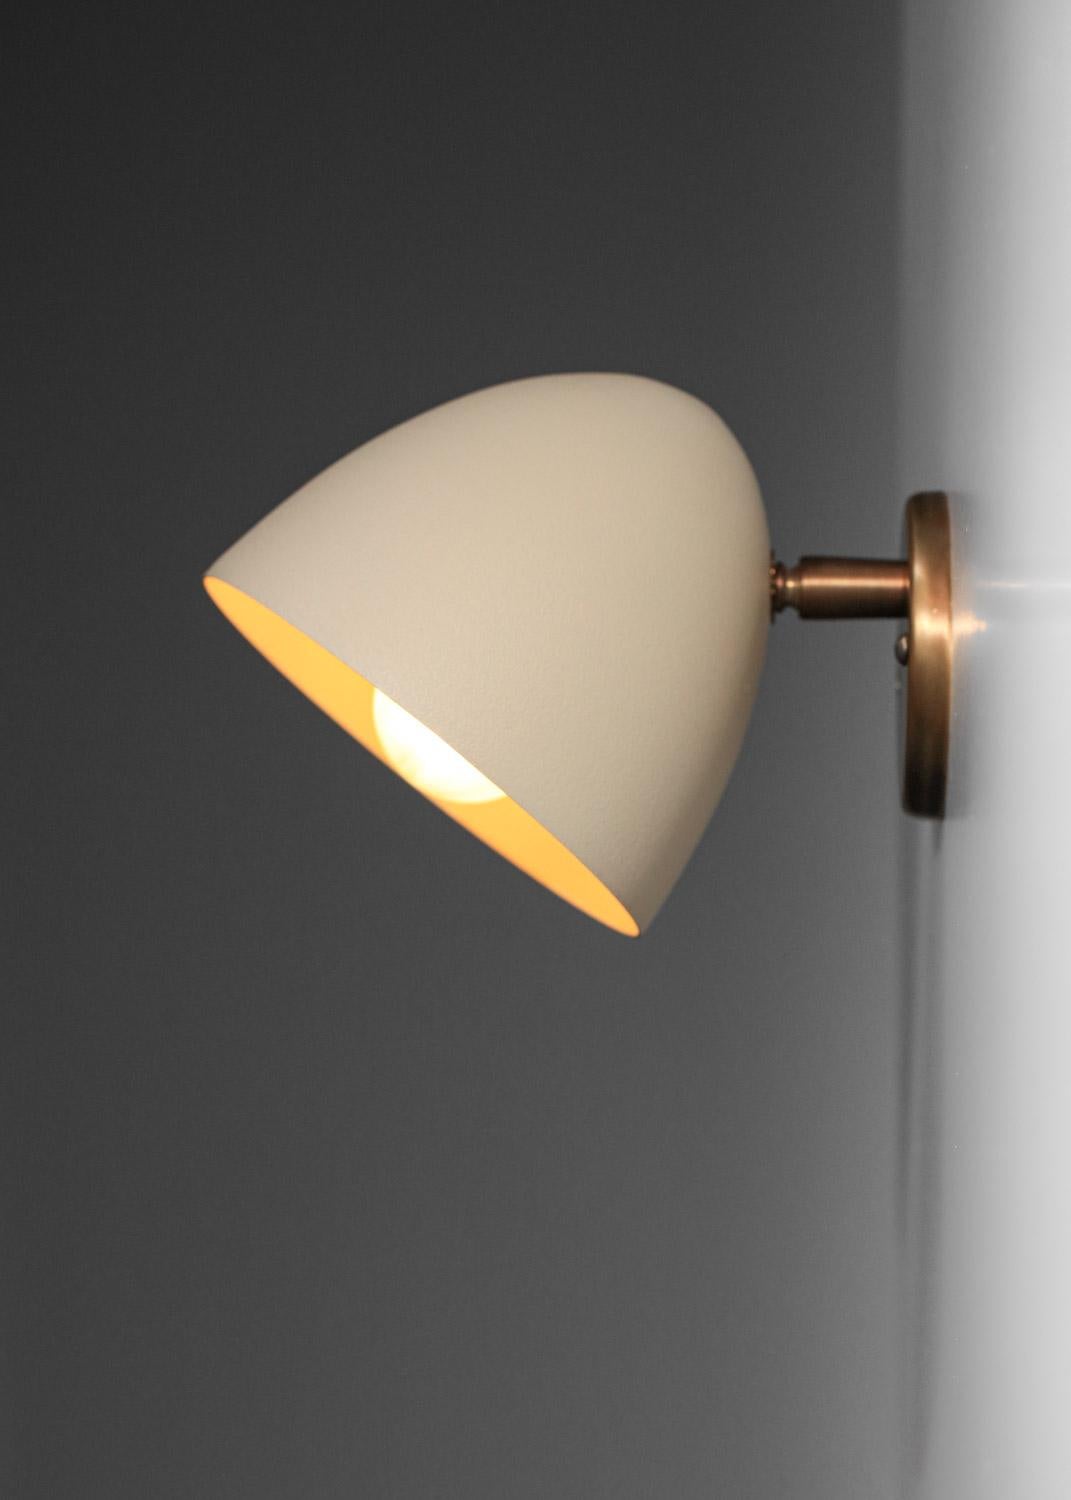 Danke Galerie is delighted to present its new collection of modern lighting fixtures. These sconces were designed in our studio to create a new range of modern, timeless lighting fixtures, with particular attention to detail in the finishes and